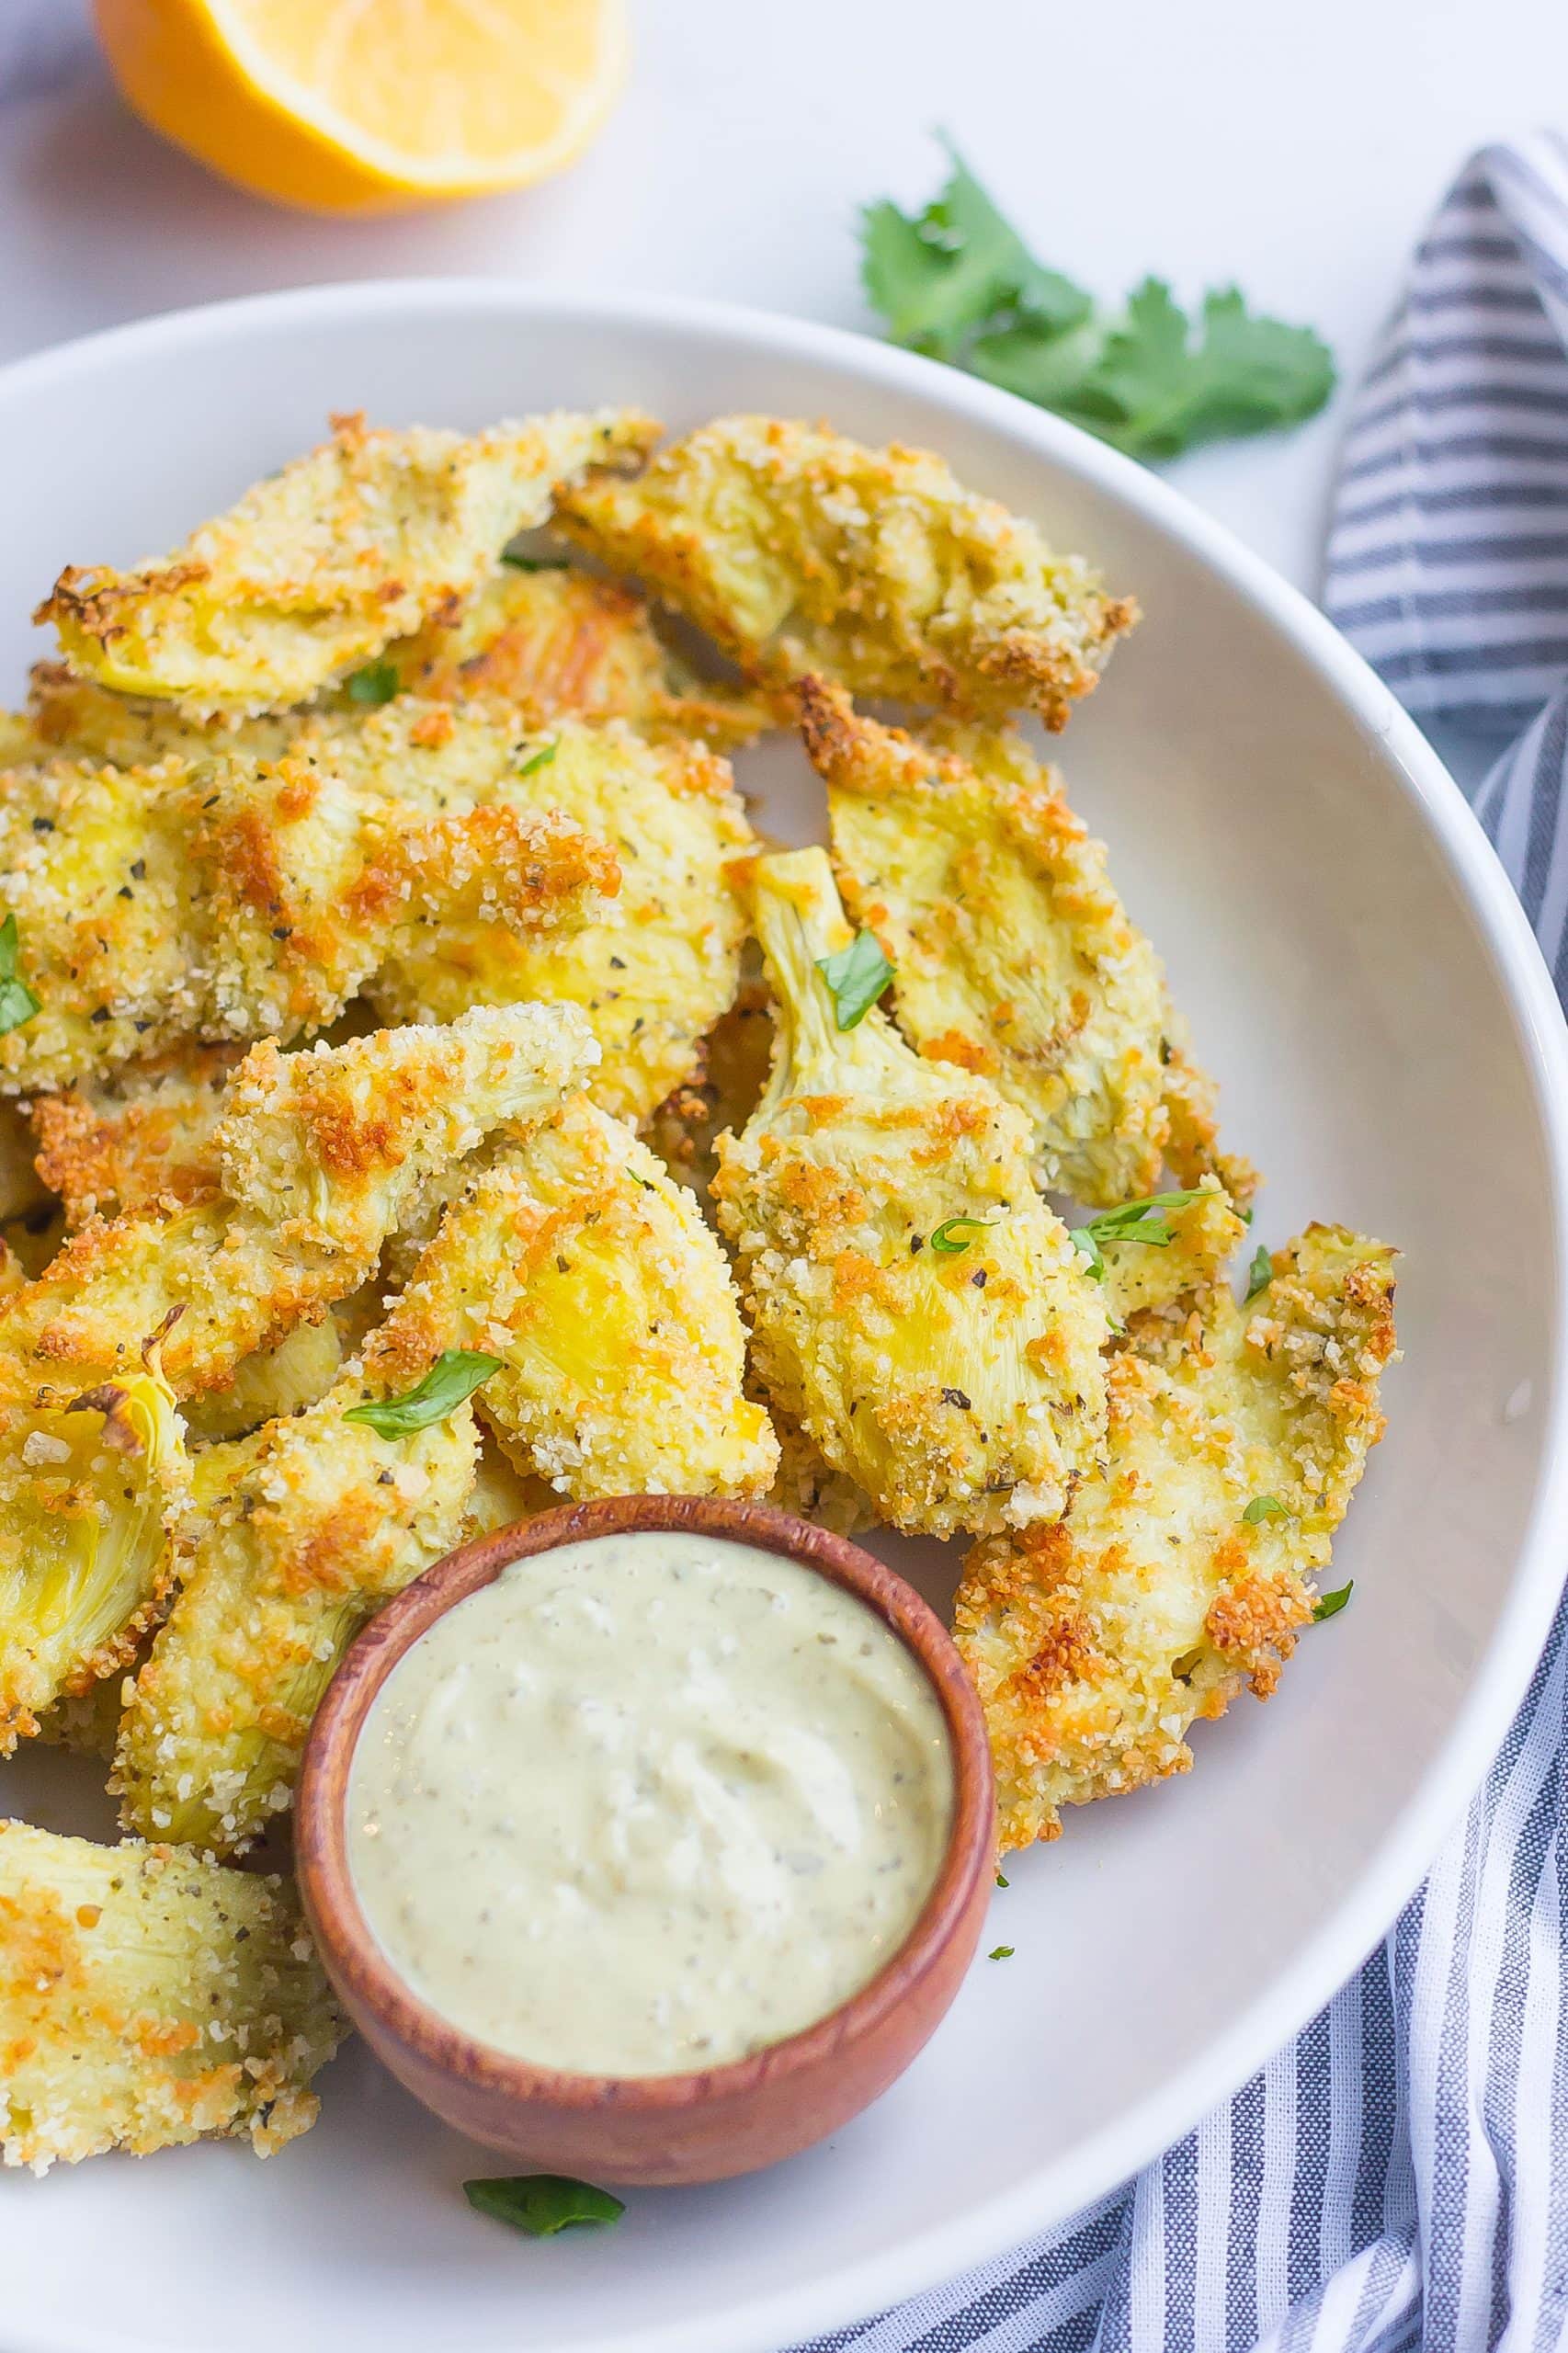 baked parmesan artichoke hearts on a plate with aioli sauce